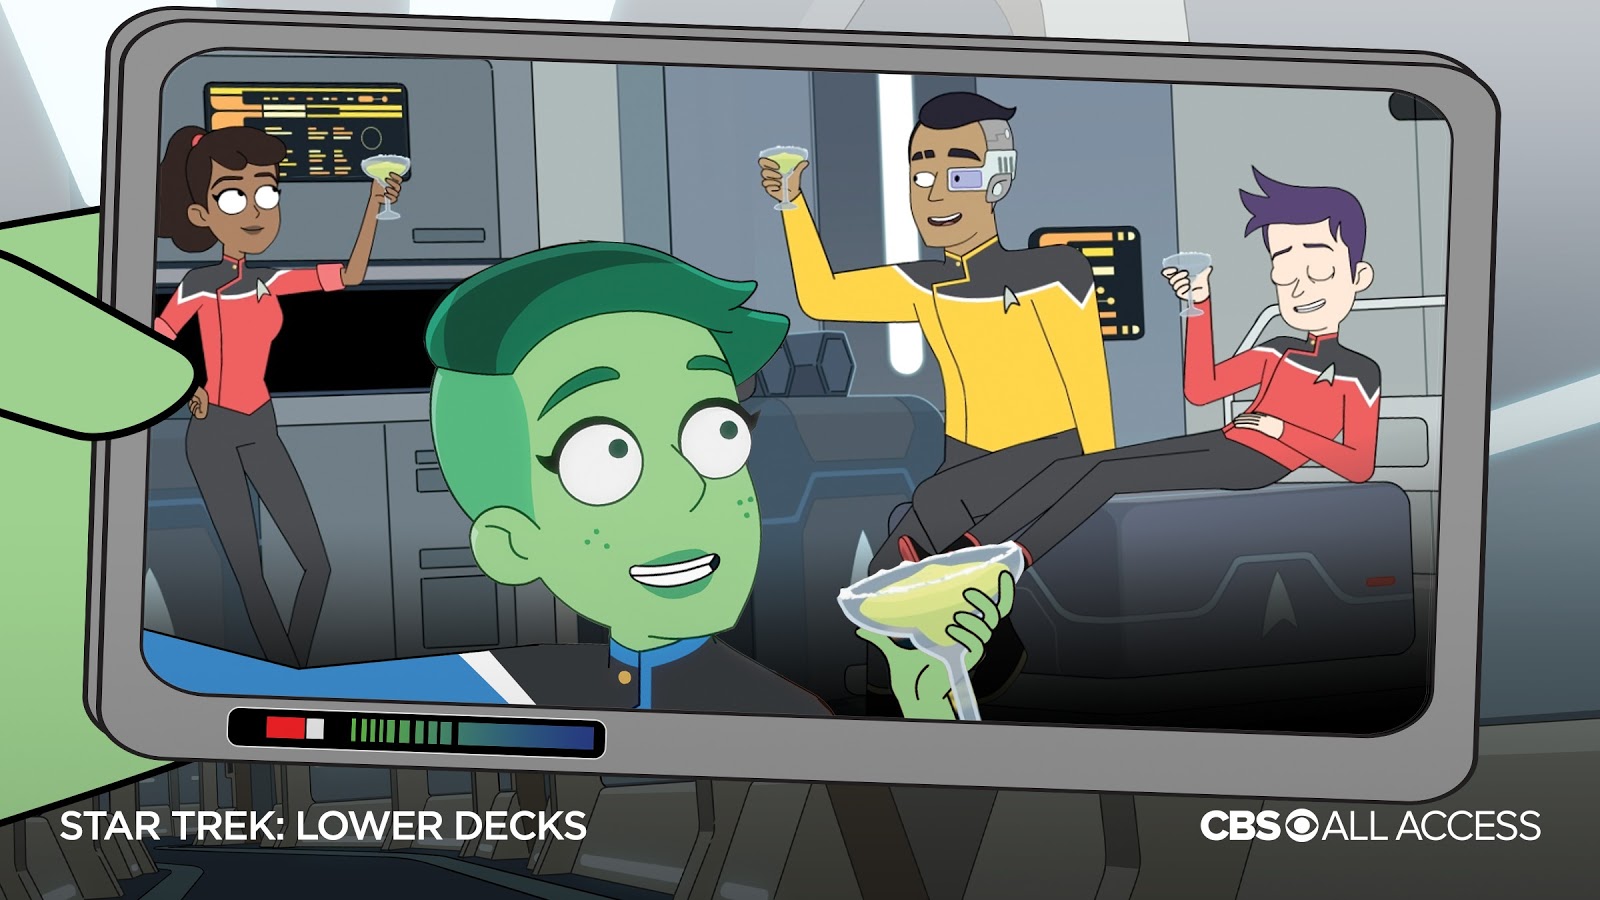 Lower Decks 1x04: Moist Vessel previews, and other series updates.